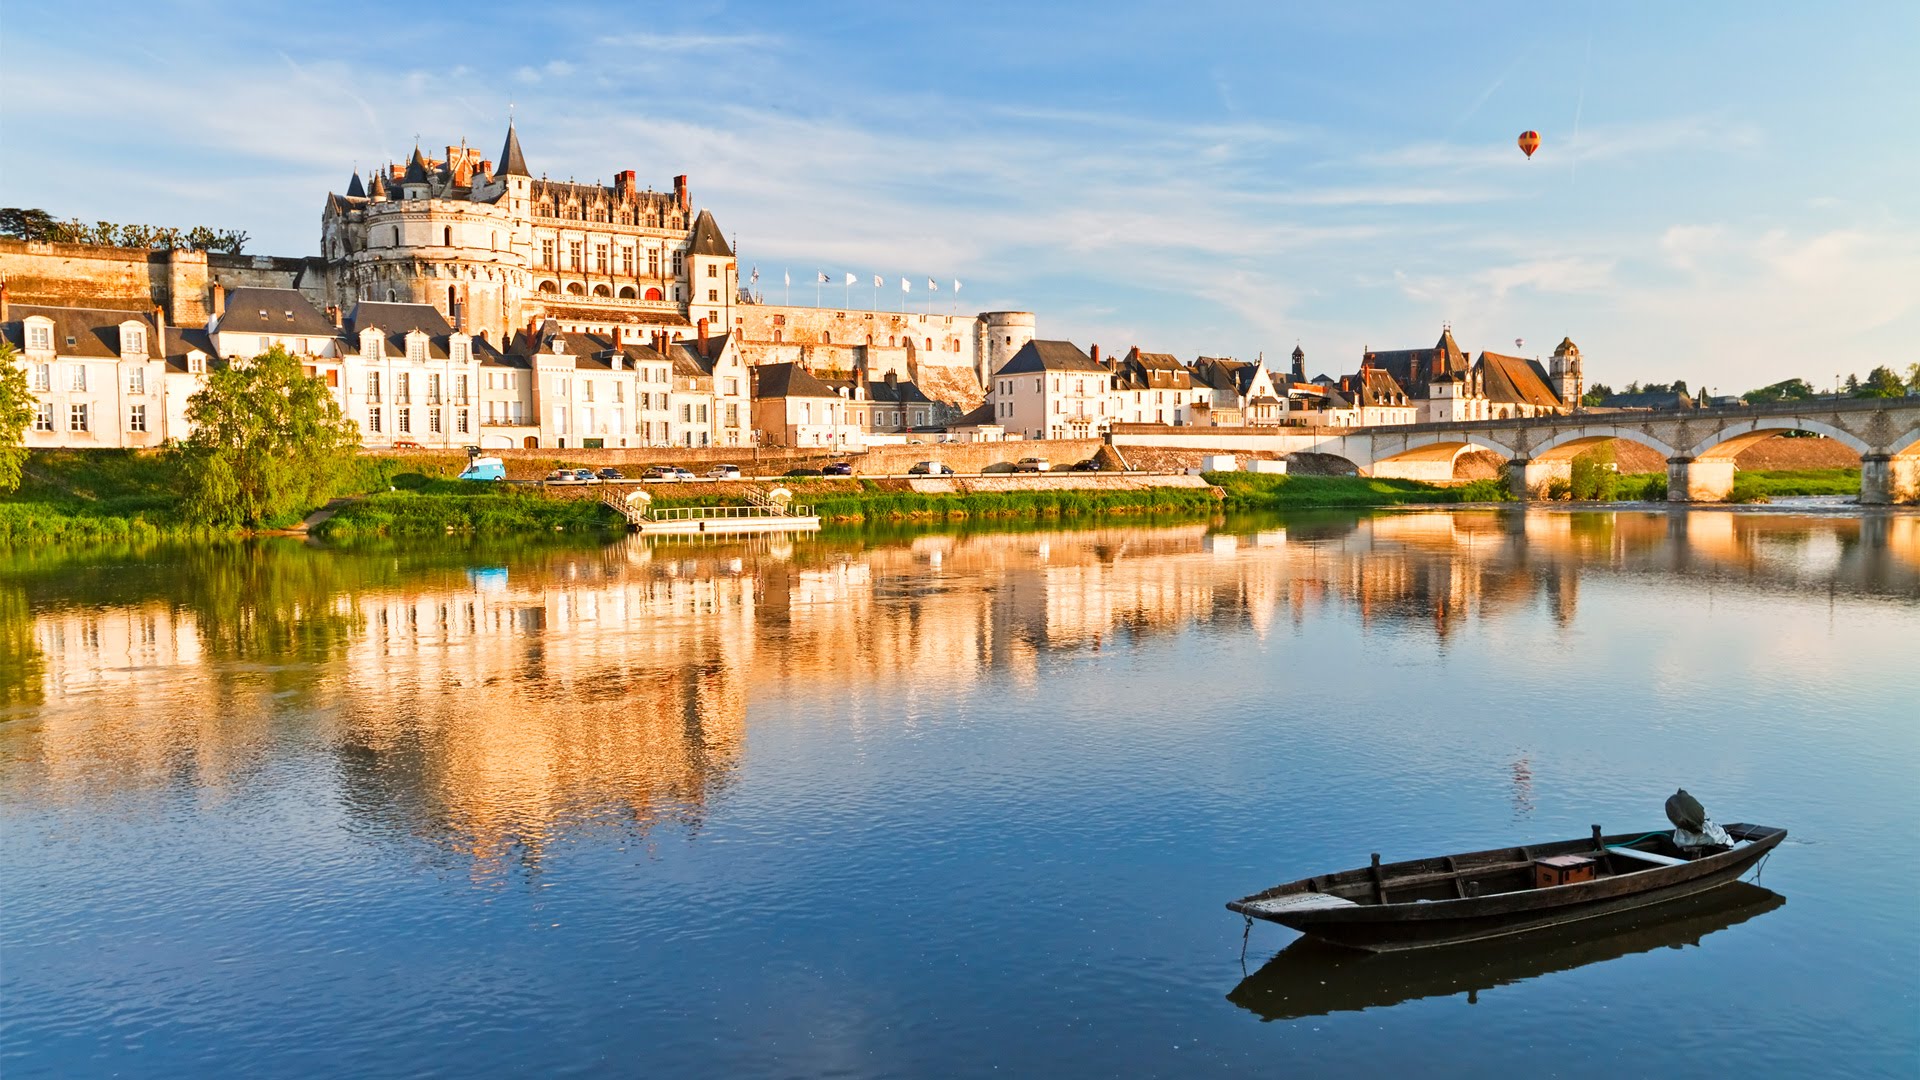 Discover Amboise in Loire Valley - France - YouTube